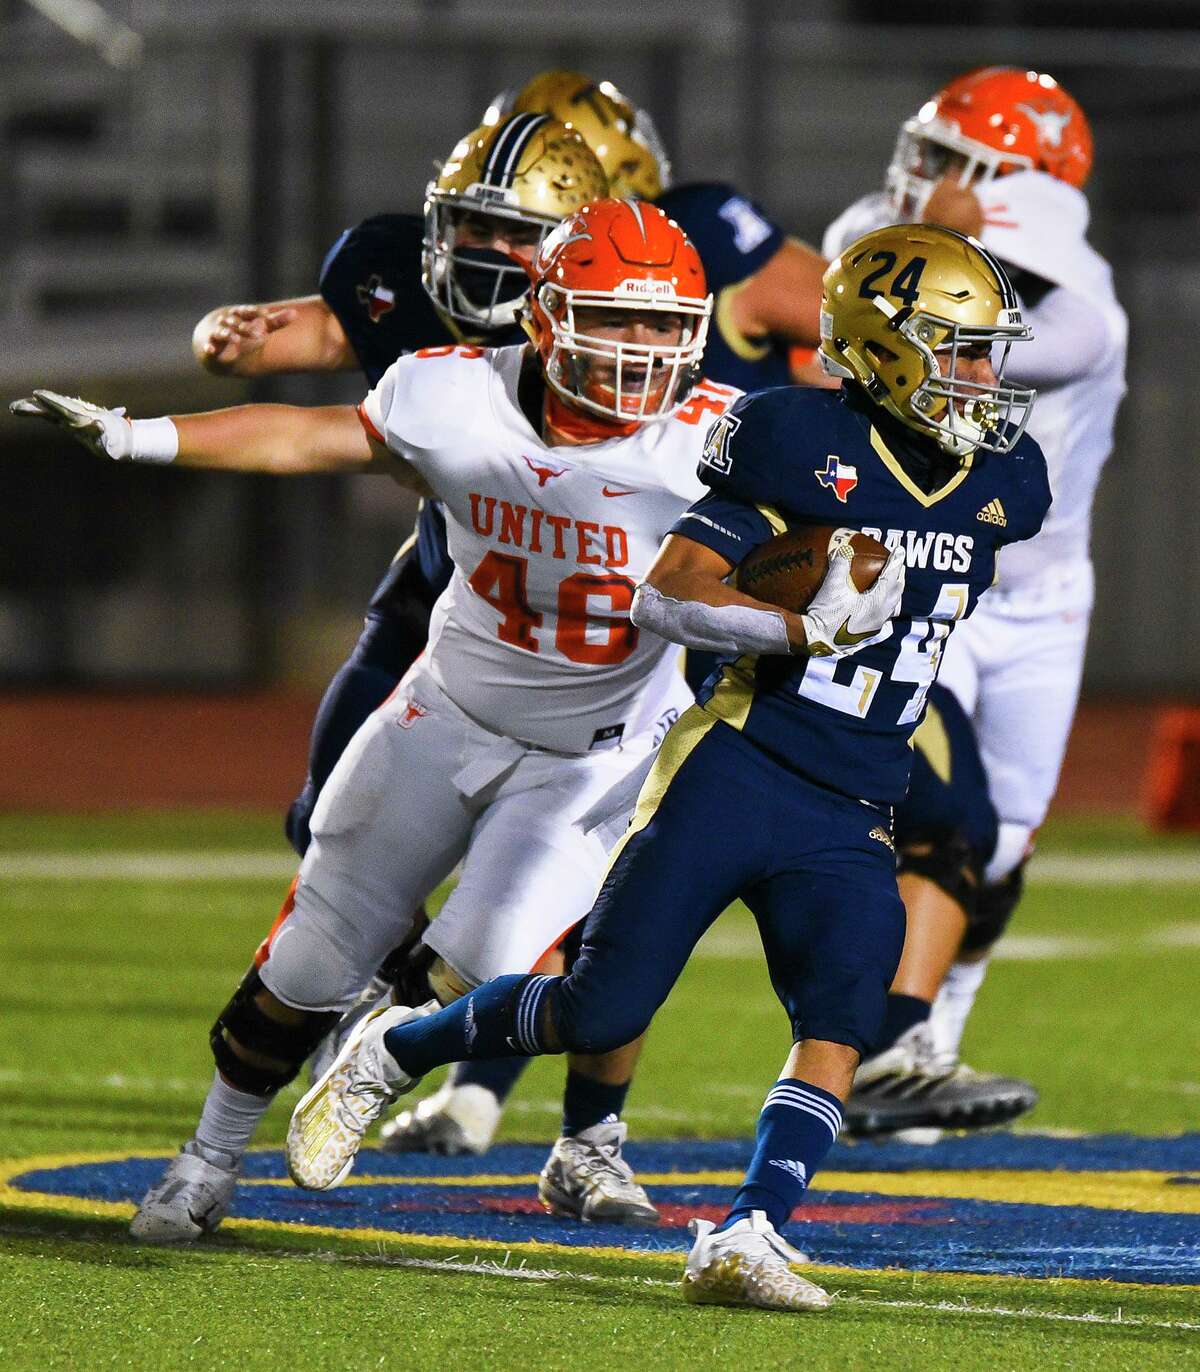 United's Gael Soto (46) was selected as Dave Campbell Texas Football's Preseason District 30-6A Defensive MVP. He was one of just six defensive linemen selected for the honor in Class 6A. 